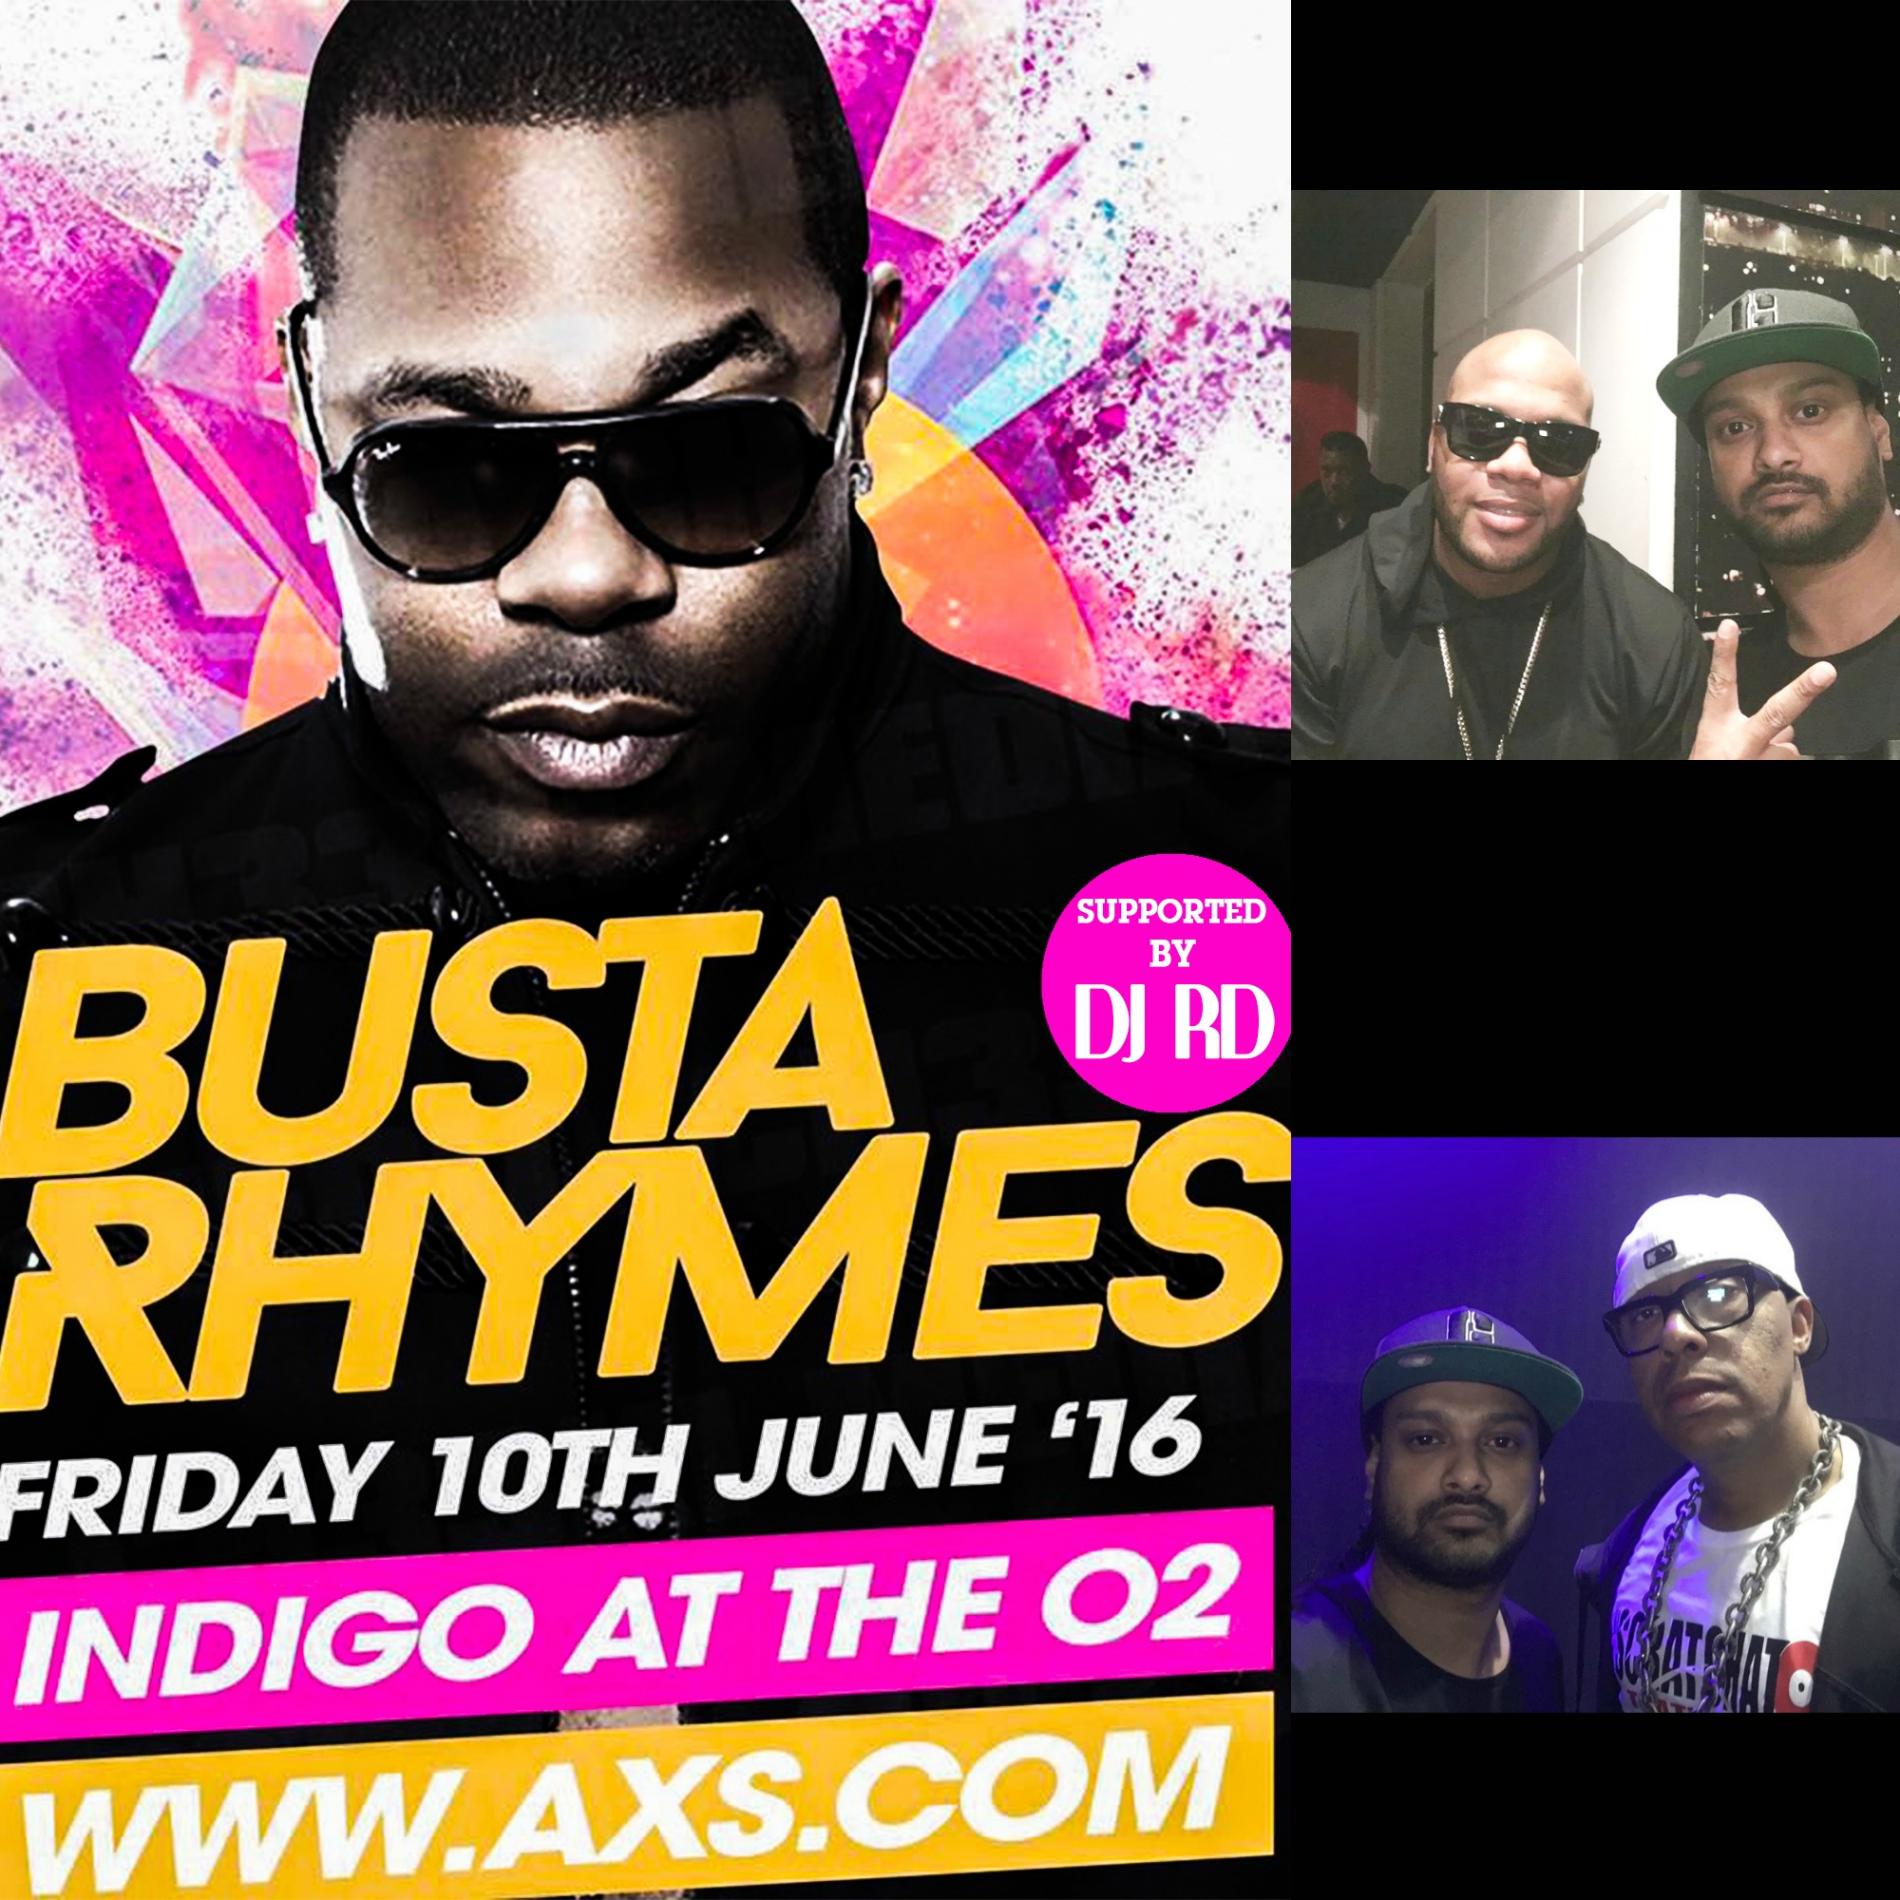 DJ RD Supports Busta Rhymes On Tour